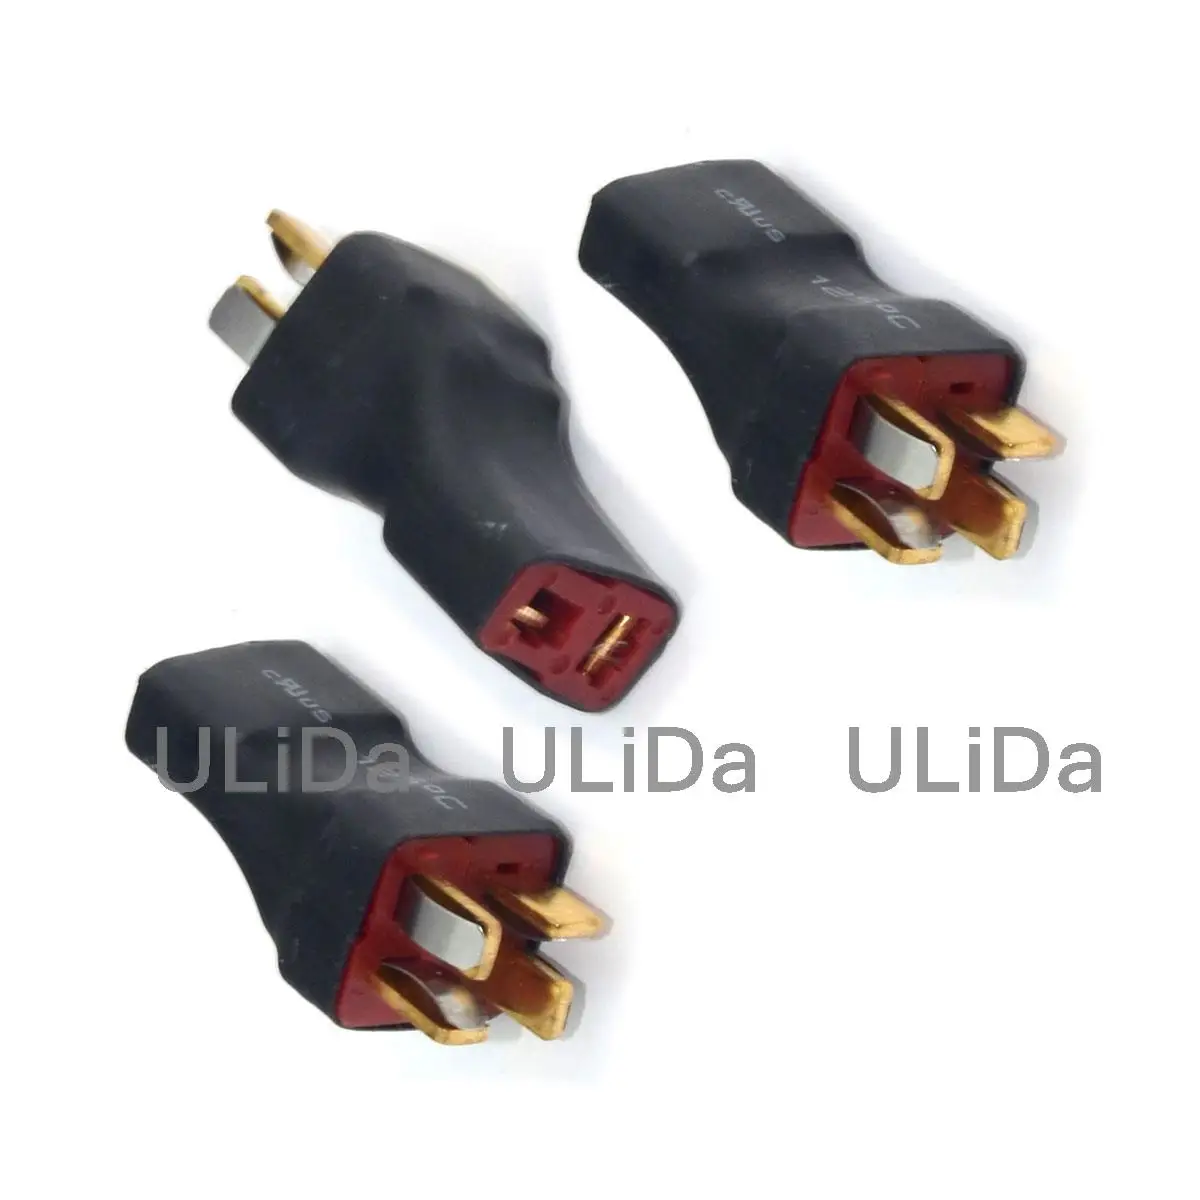 

3pcs T-Plug Deans Style Series RC Battery ESC Connector / Adapter 1F2M for Helicopter Multicopter Quadcopter